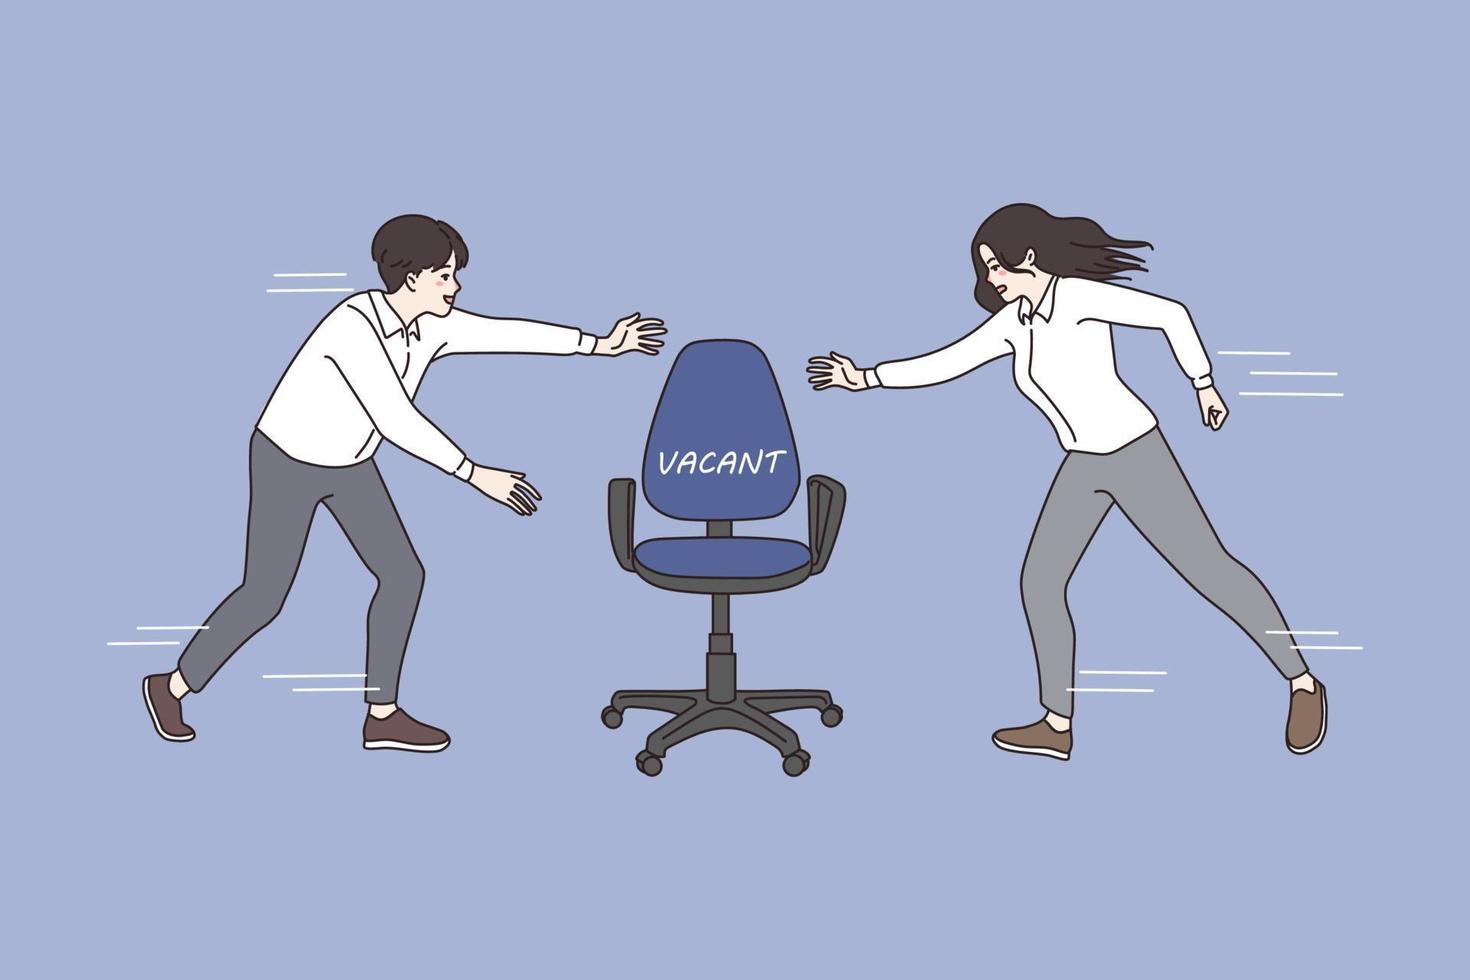 Man and woman applicants compete for vacant position in office. Motivated job candidates fight for work vacancy. Rivalry, competition. Employment and hiring concept. Flat vector illustration.